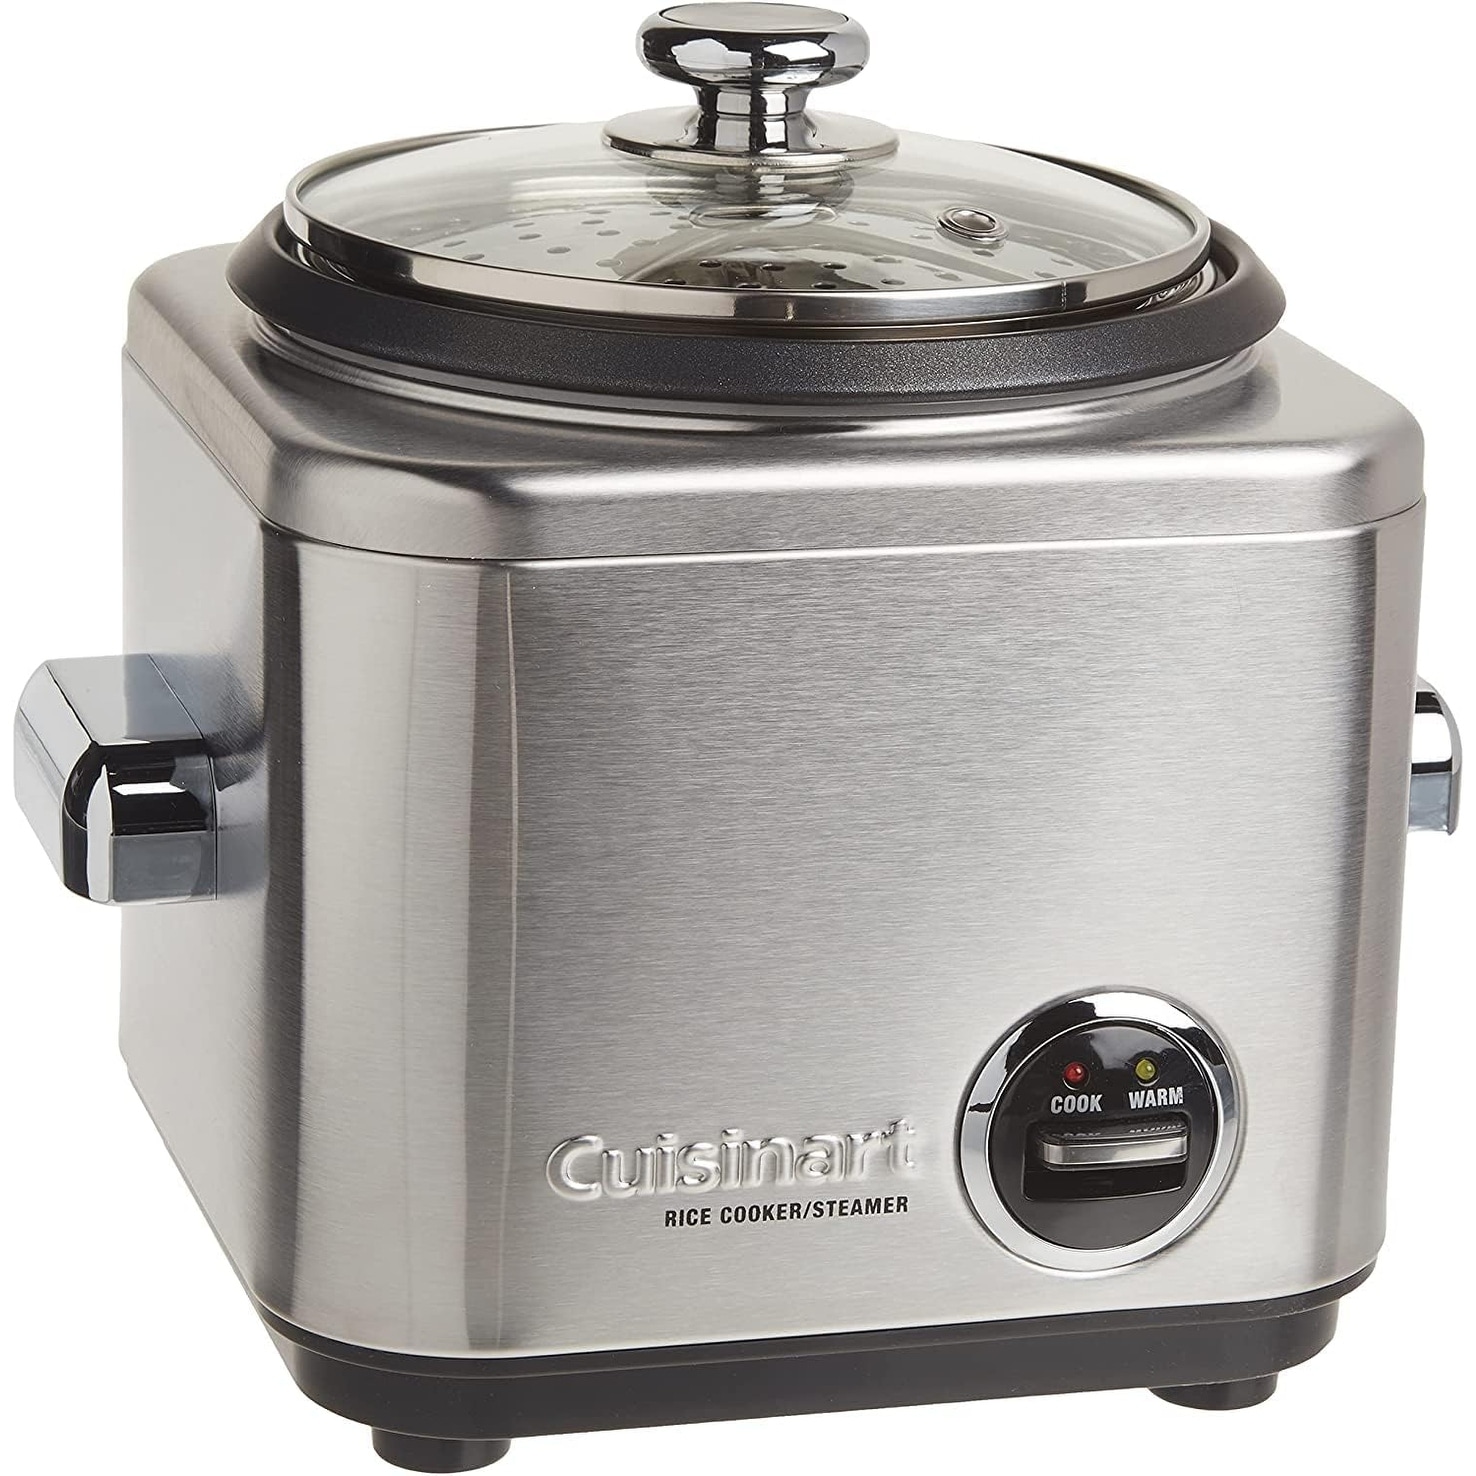 https://ak1.ostkcdn.com/images/products/is/images/direct/07b42d81dbe30ebbbacfd84bd3838f9e790aef01/Cuisinart-CRC-400P1-4-Cup-Rice-Cooker%2C-Stainless-Steel-Exterior.jpg